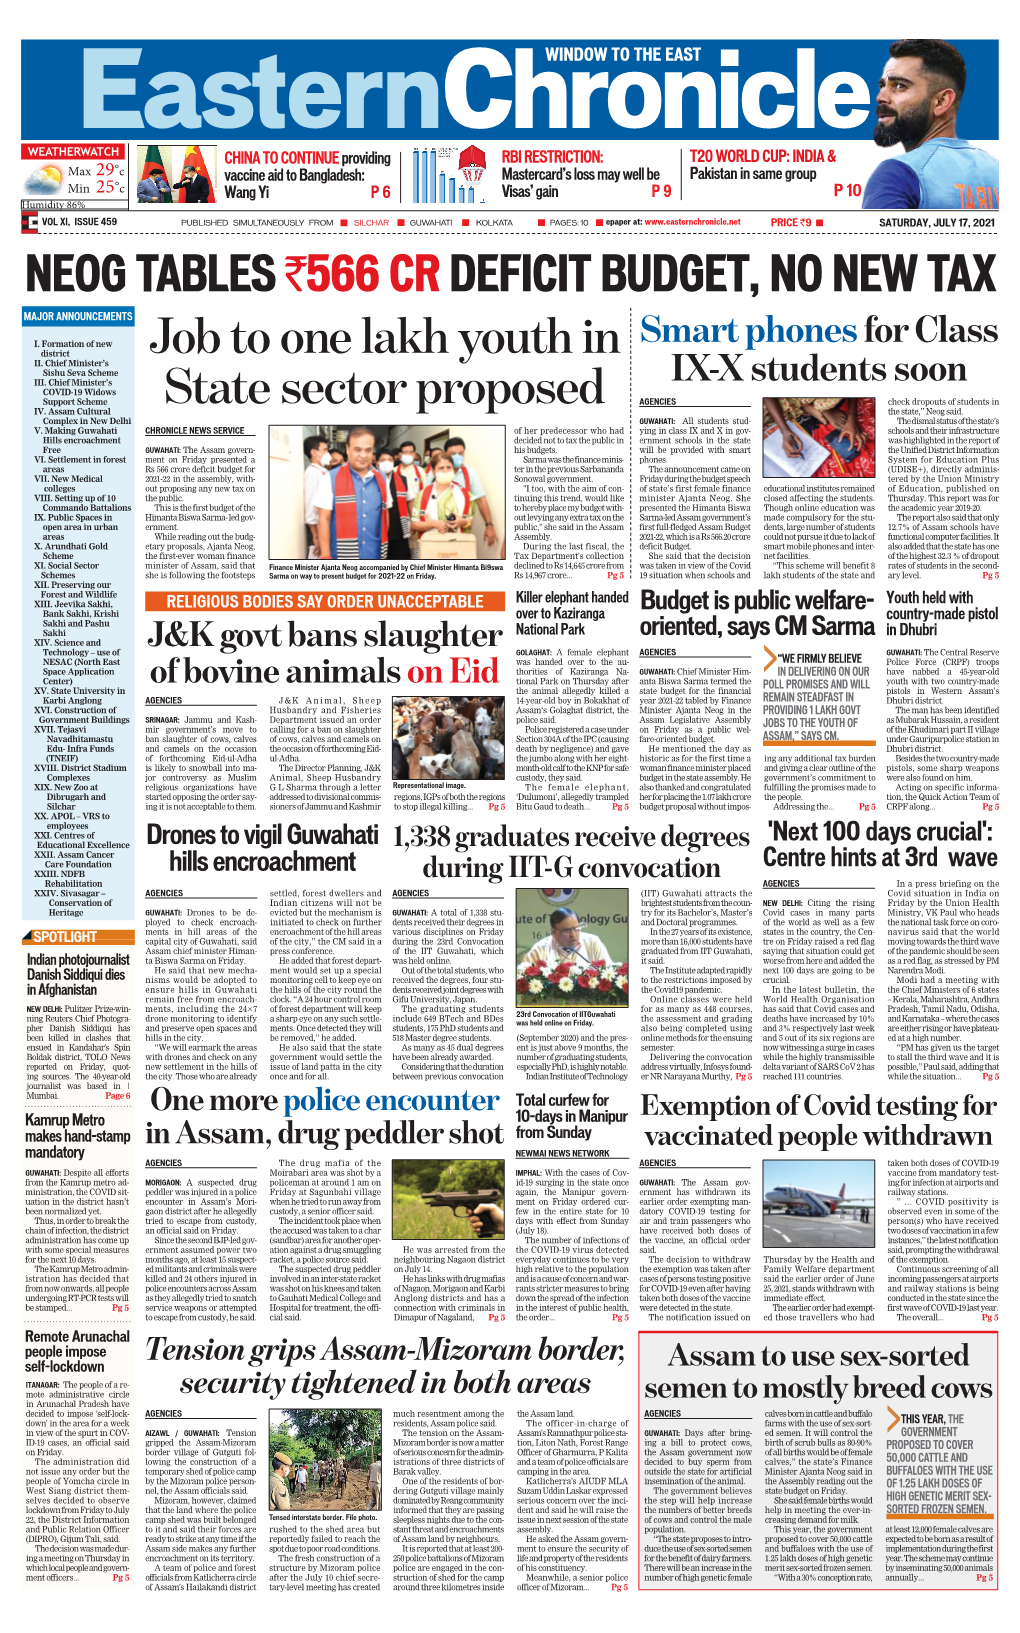 Job to One Lakh Youth in State Sector Proposed